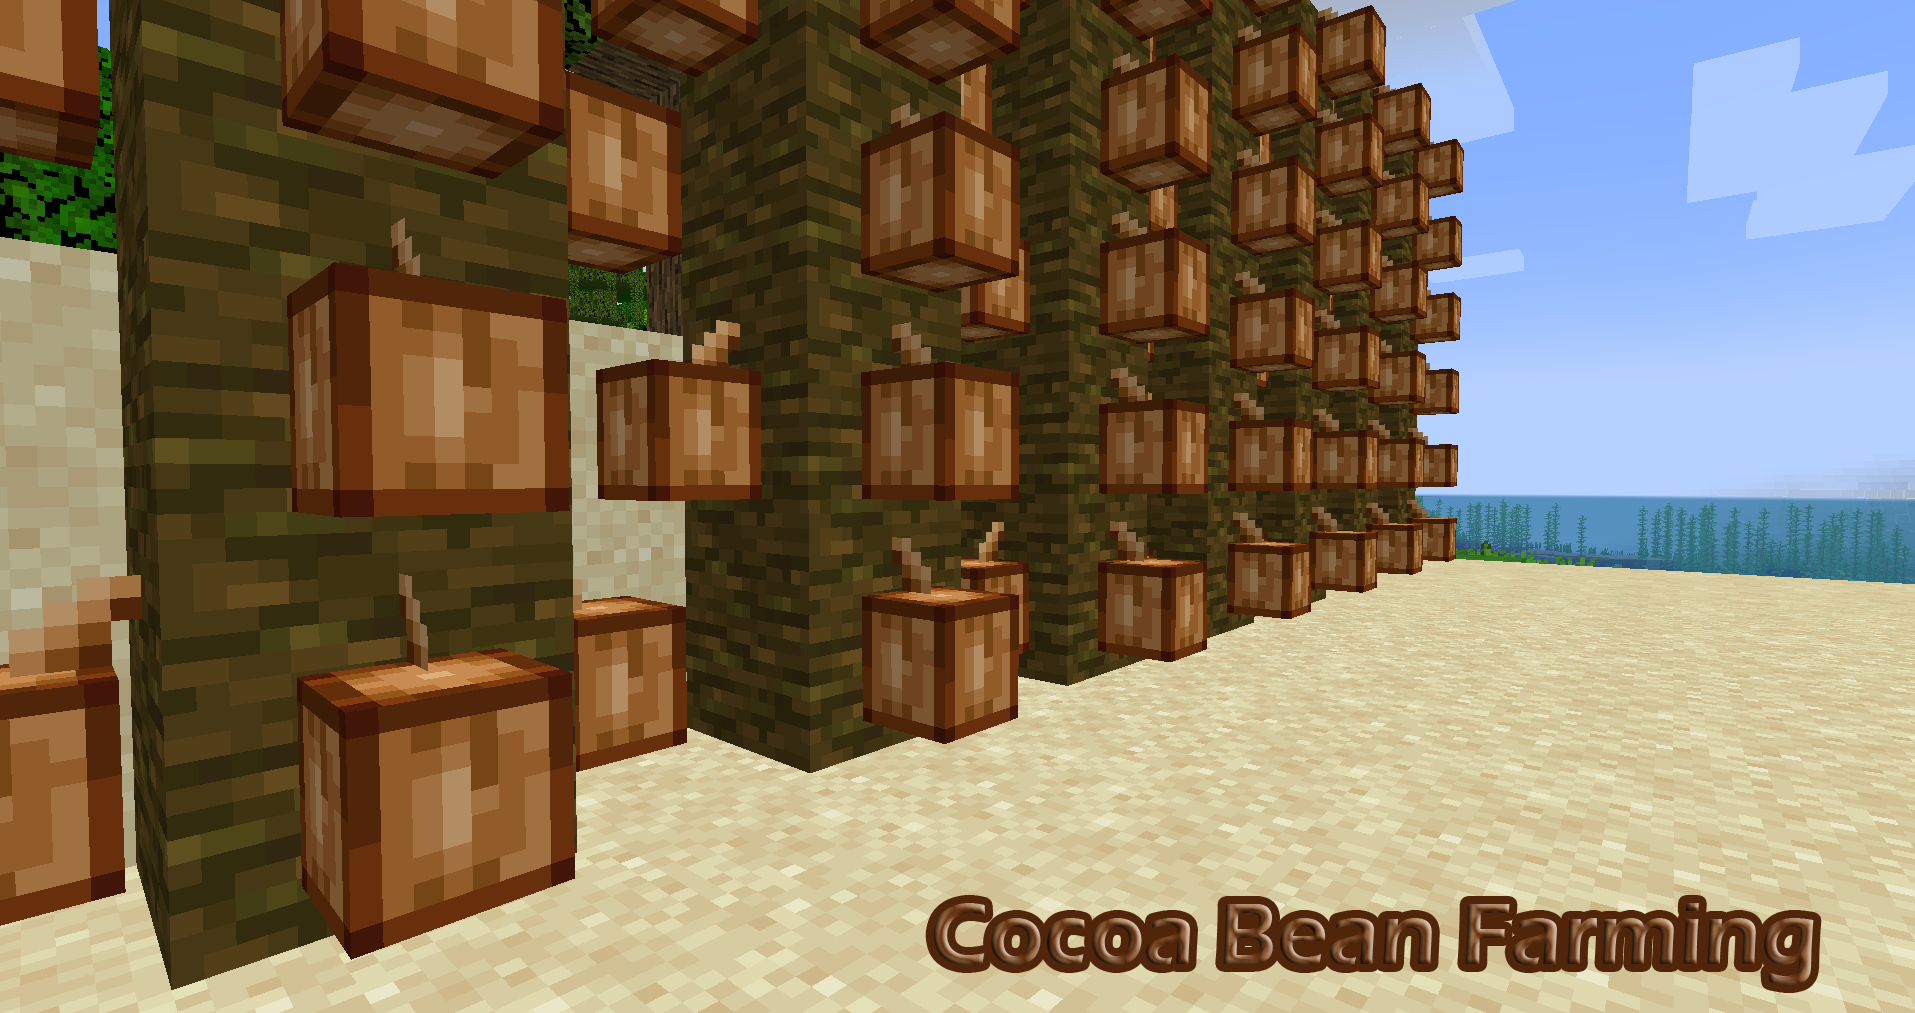 How To Make A Cocoa Bean Farm in Minecraft